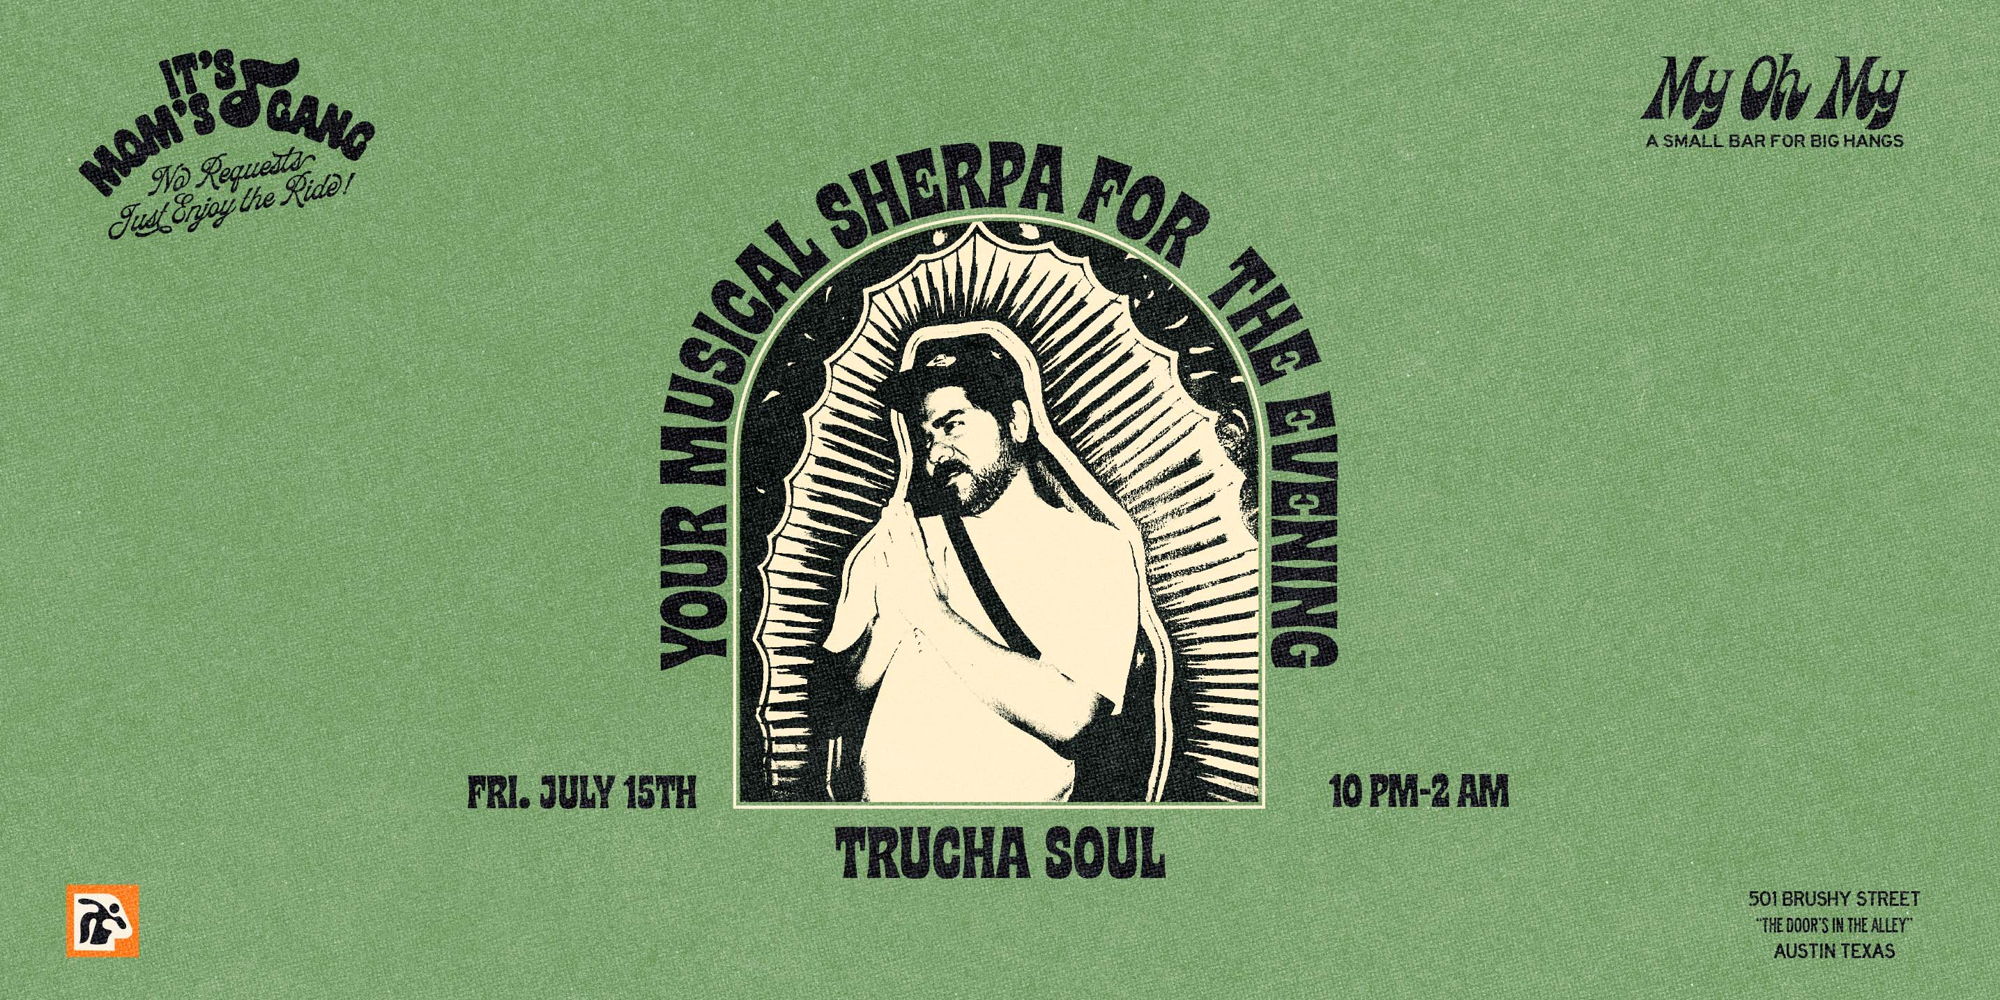 Trucha Soul at My Oh My on 7/15 promotional image